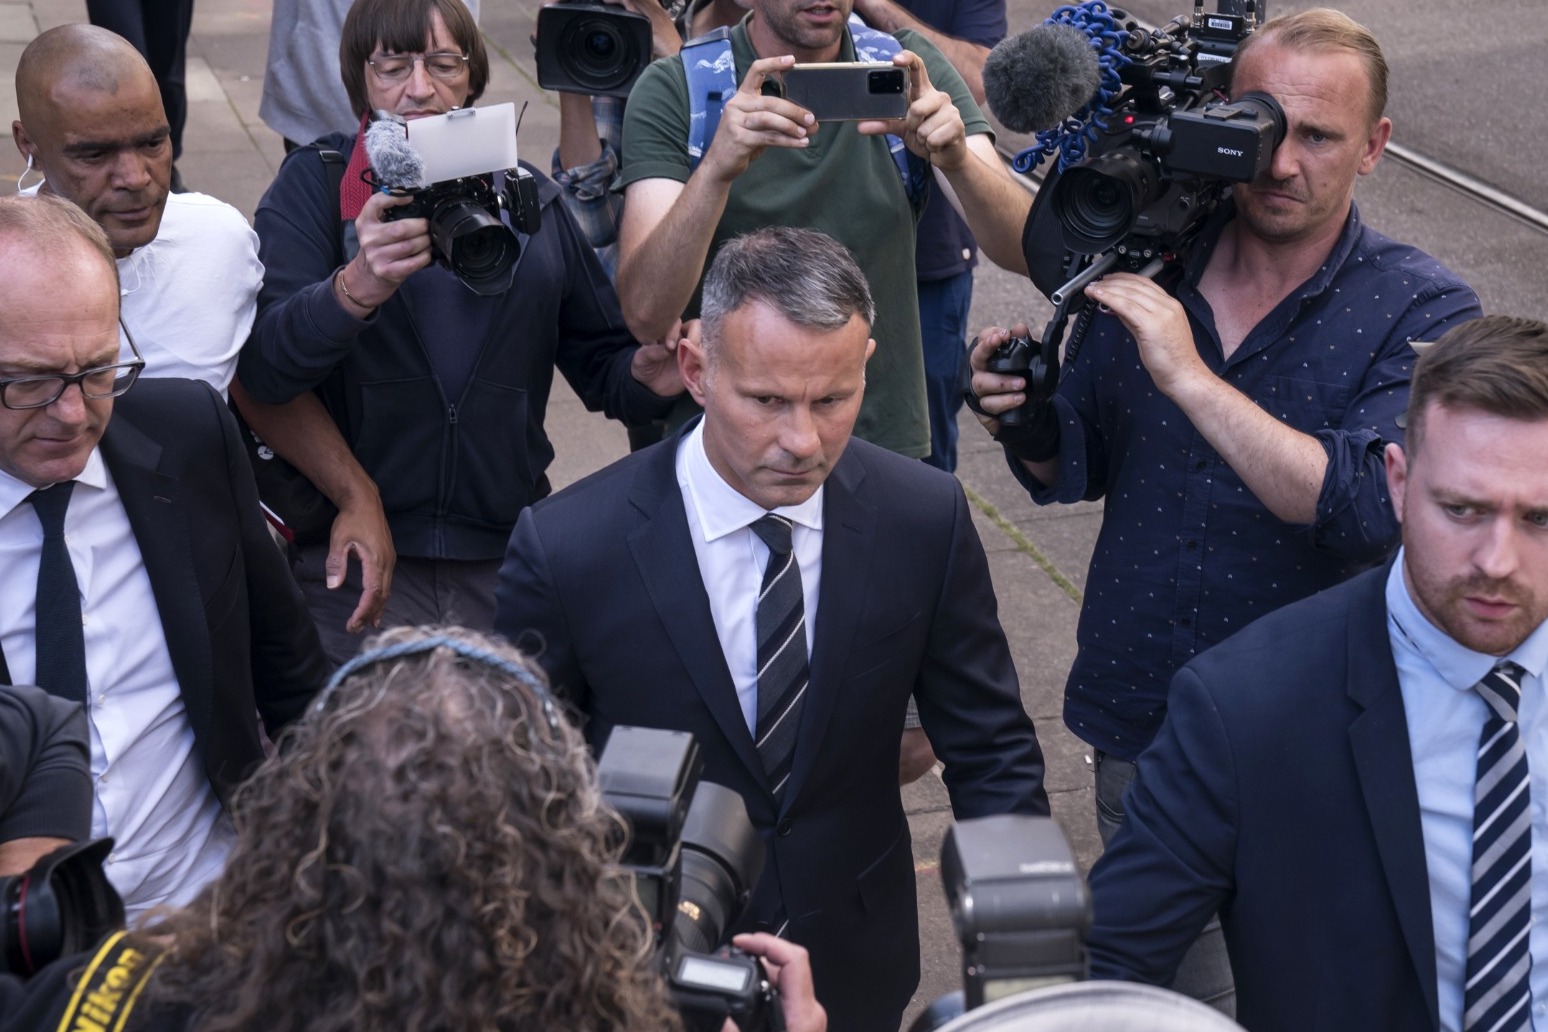 Giggs coercive and controlling behaviour detailed to jury